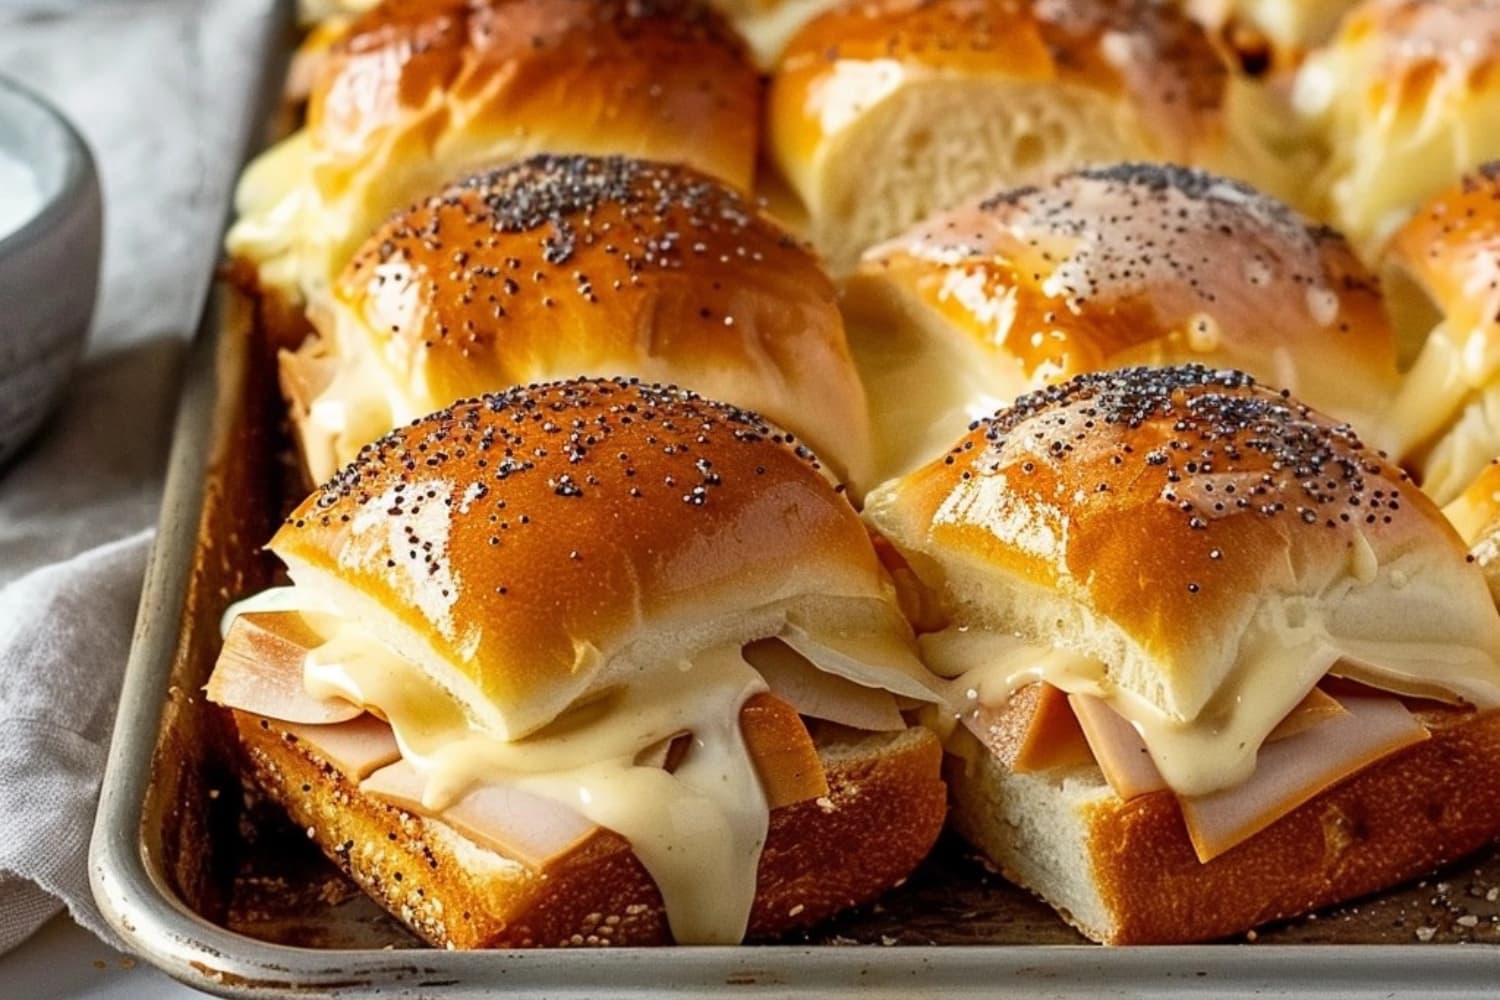 Turkey and cheese sliders on a baking tray.